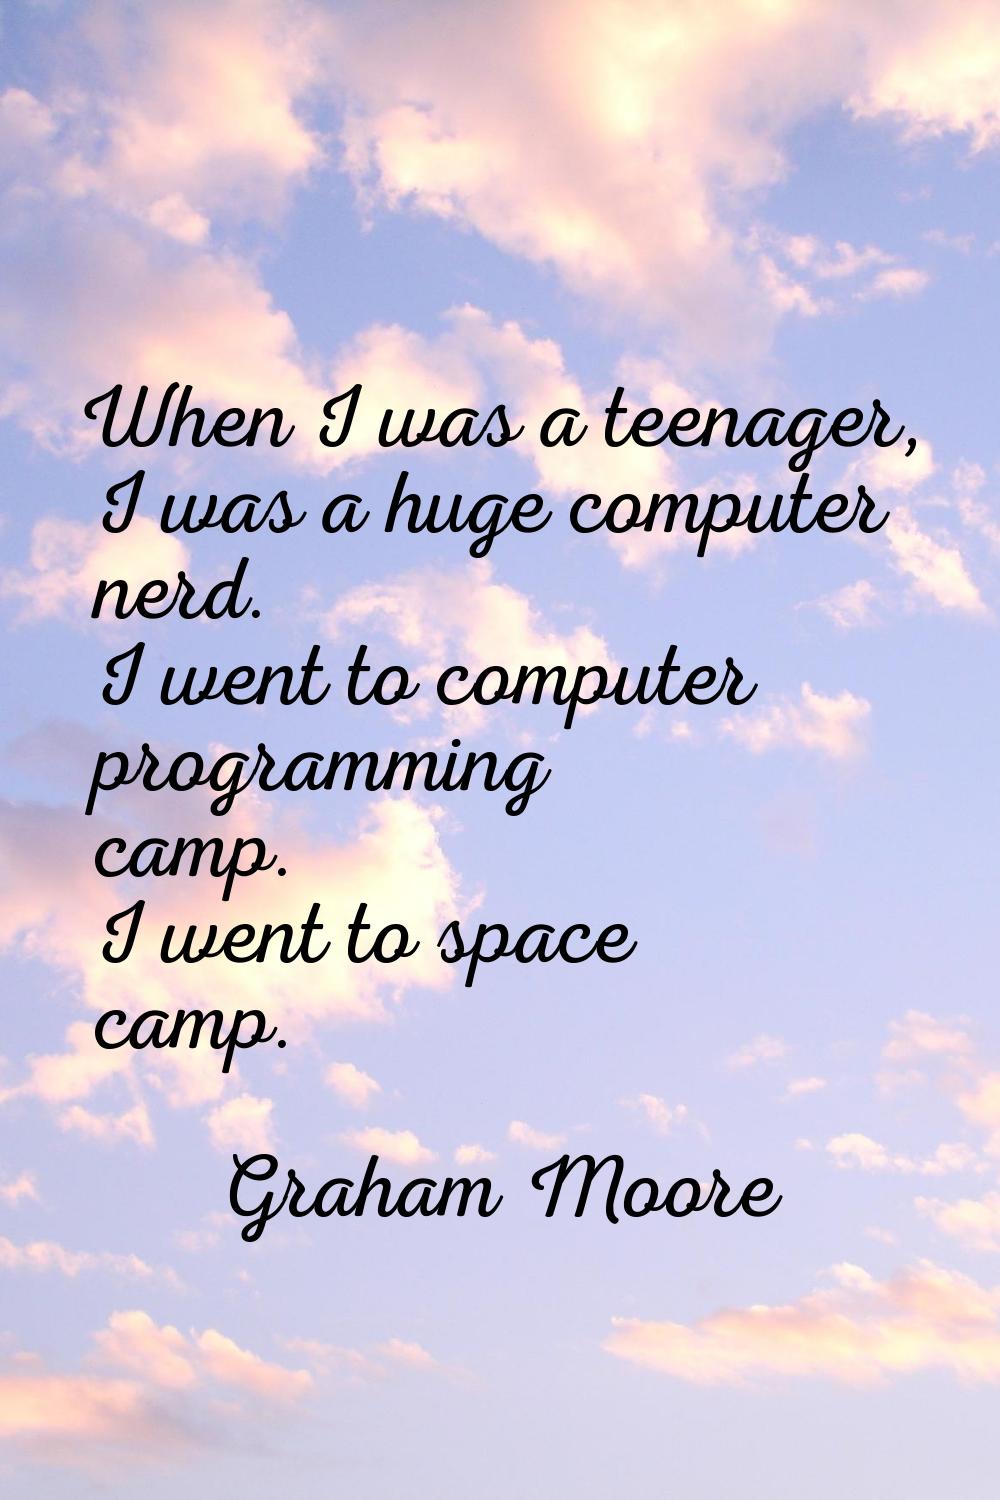 When I was a teenager, I was a huge computer nerd. I went to computer programming camp. I went to s